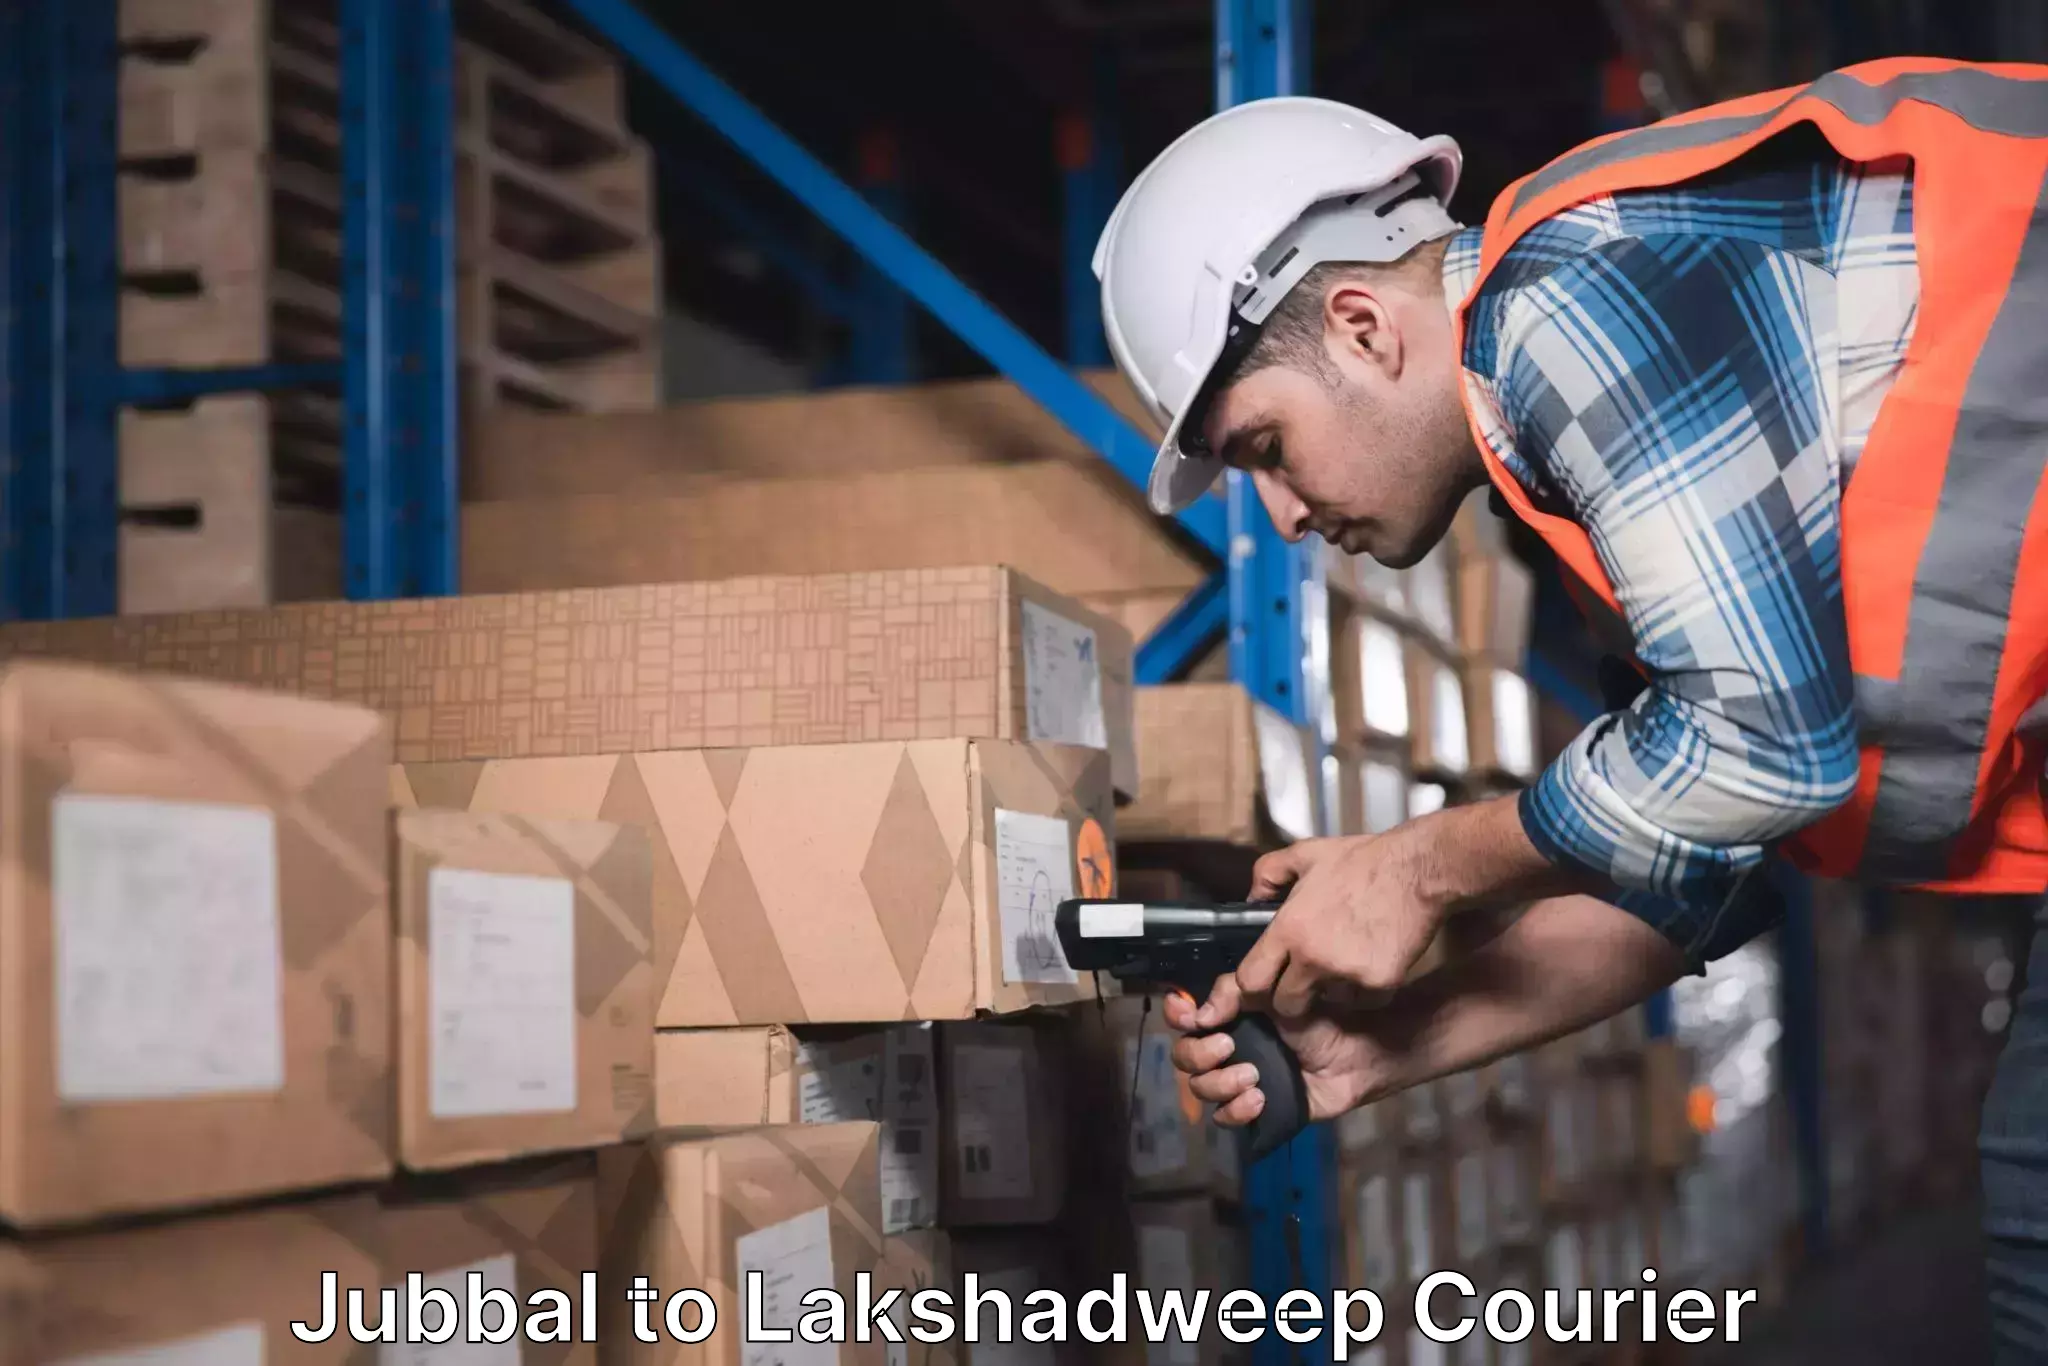 Comprehensive shipping network Jubbal to Lakshadweep